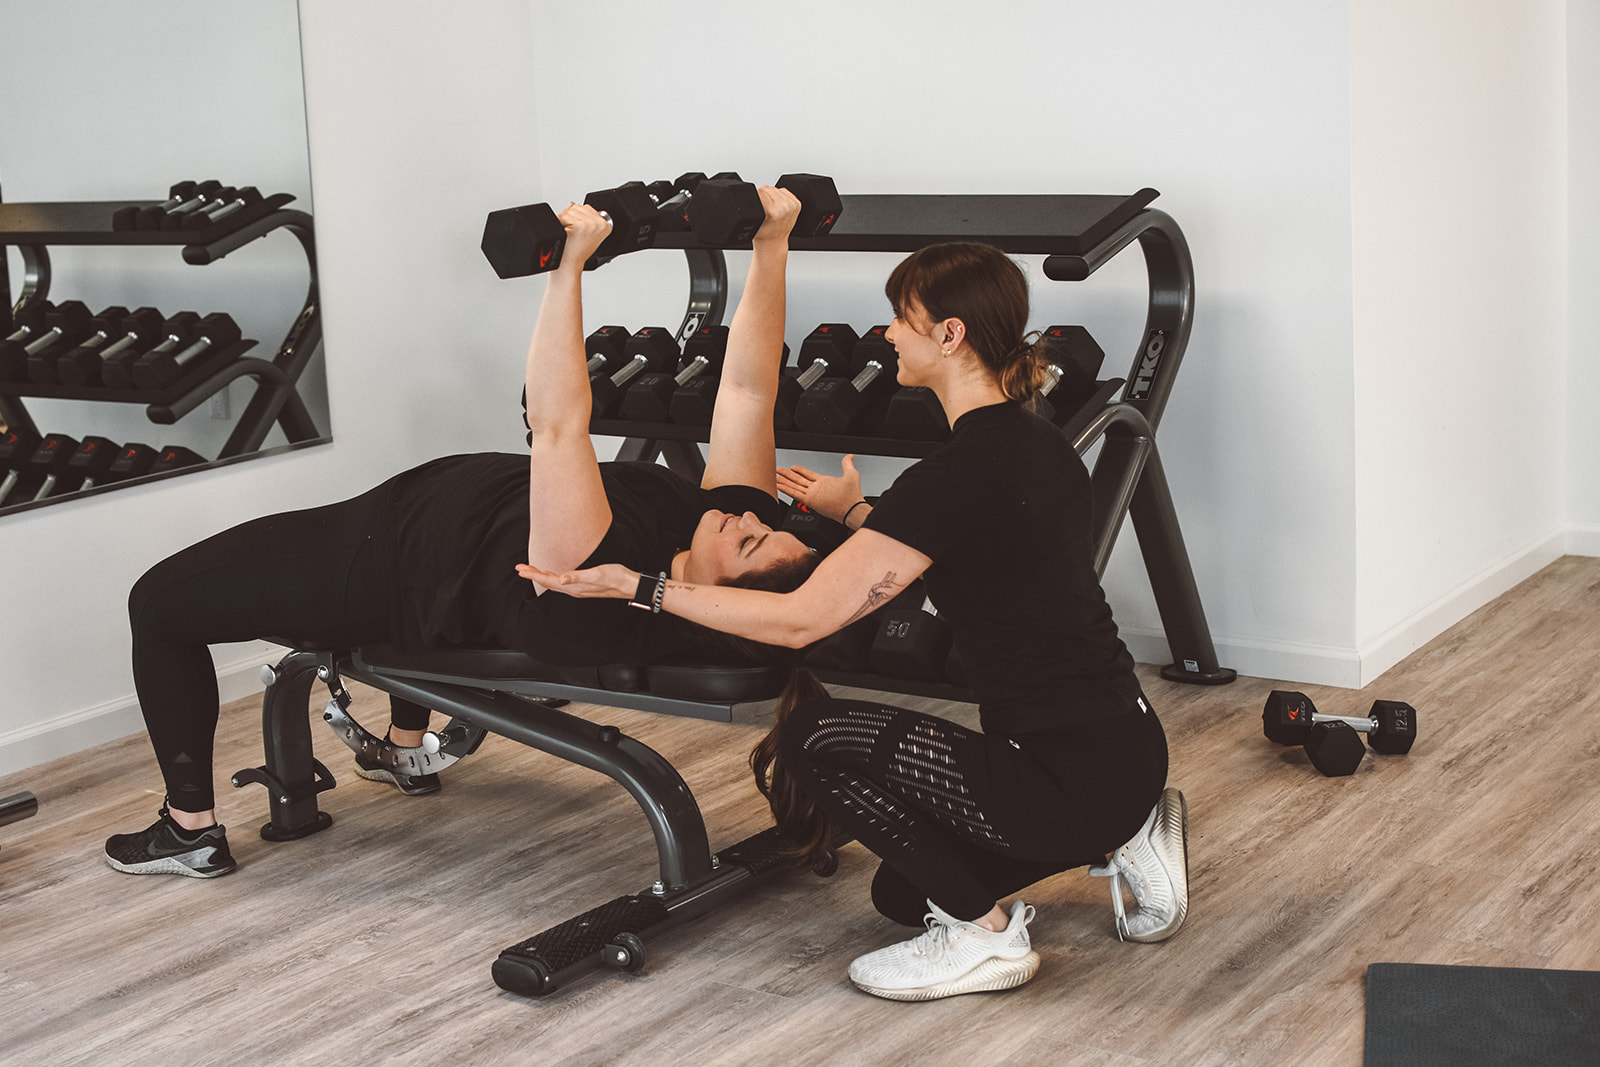 Two women engaging in personal training at a fitness studio with dumbbells.